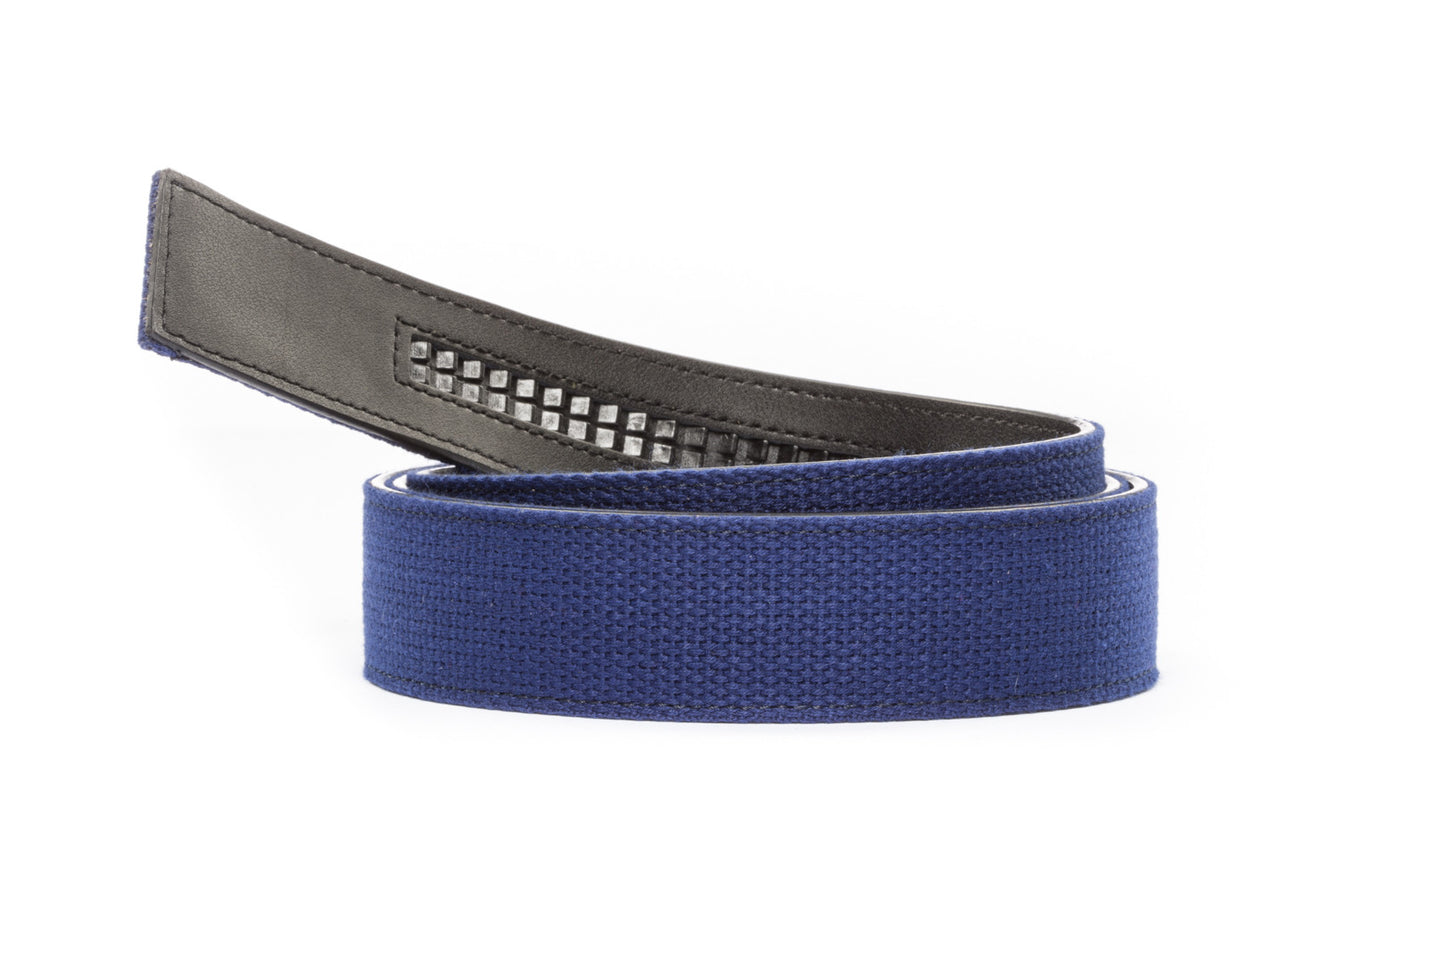 Men's canvas belt strap in navy, 1.5 inches wide, casual look, microfiber back